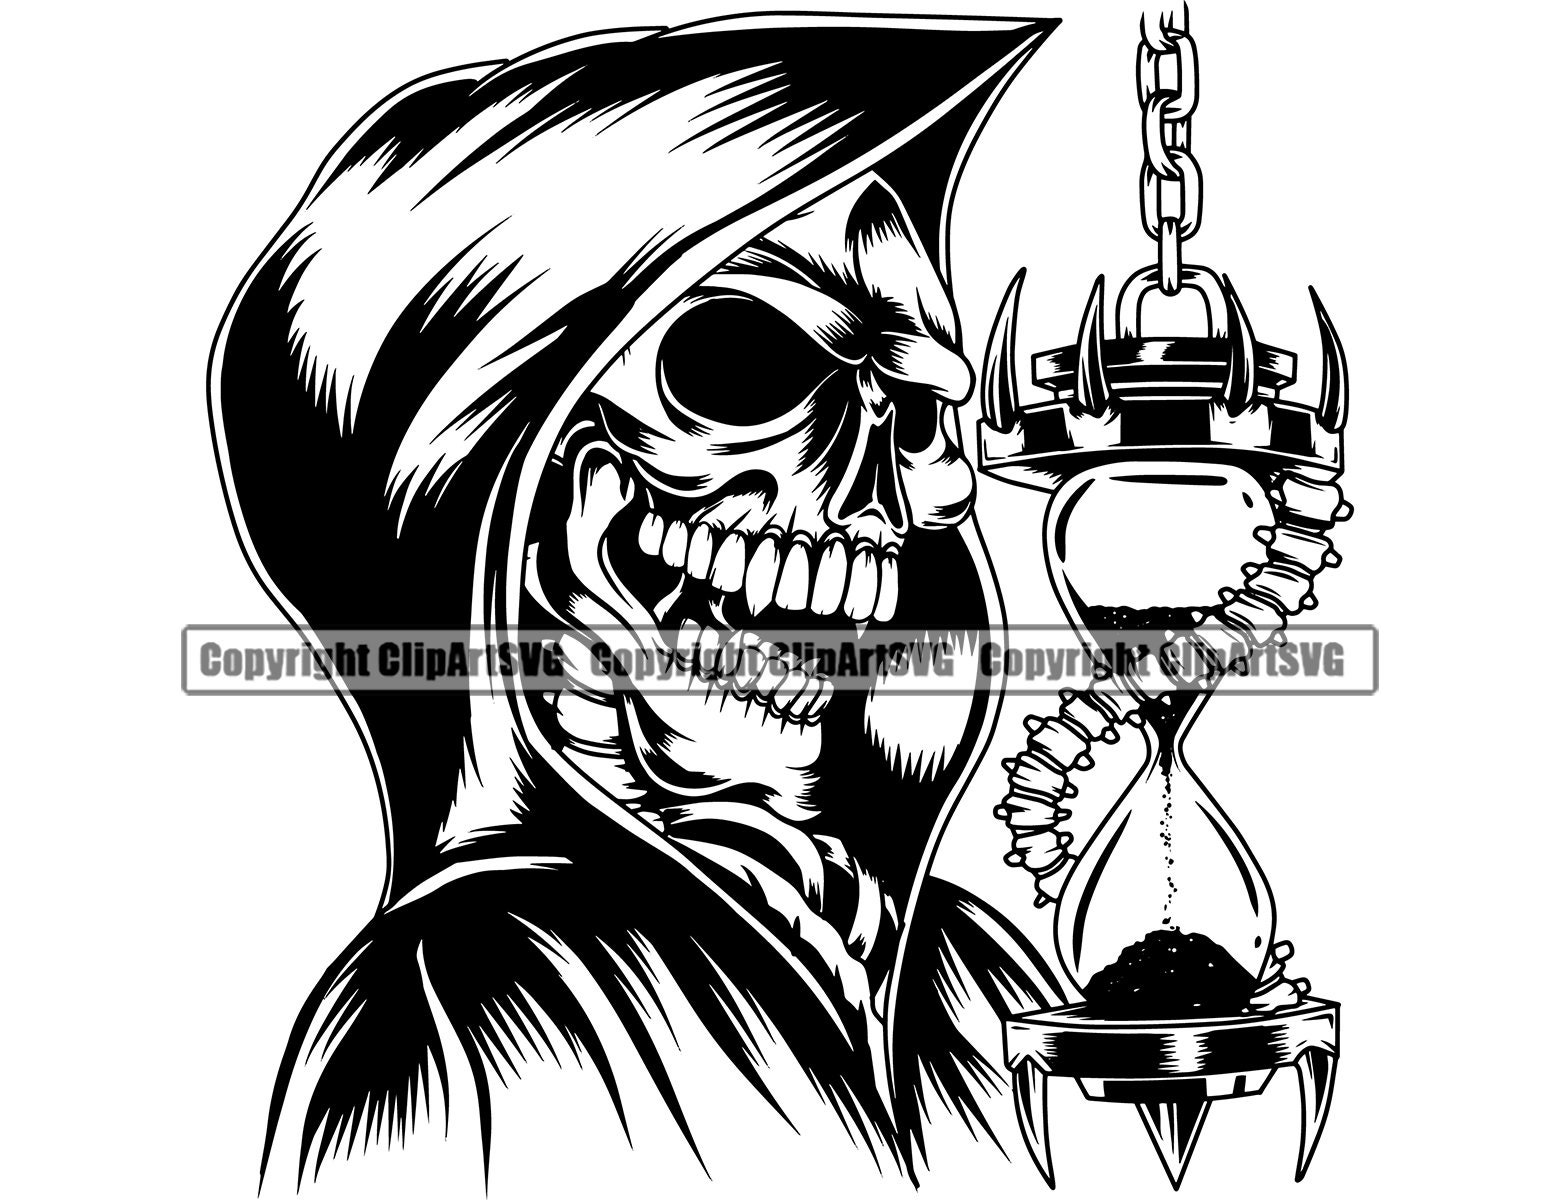 50 Wonderful Grim Reaper Tattoo That Will Inspire You To Get One